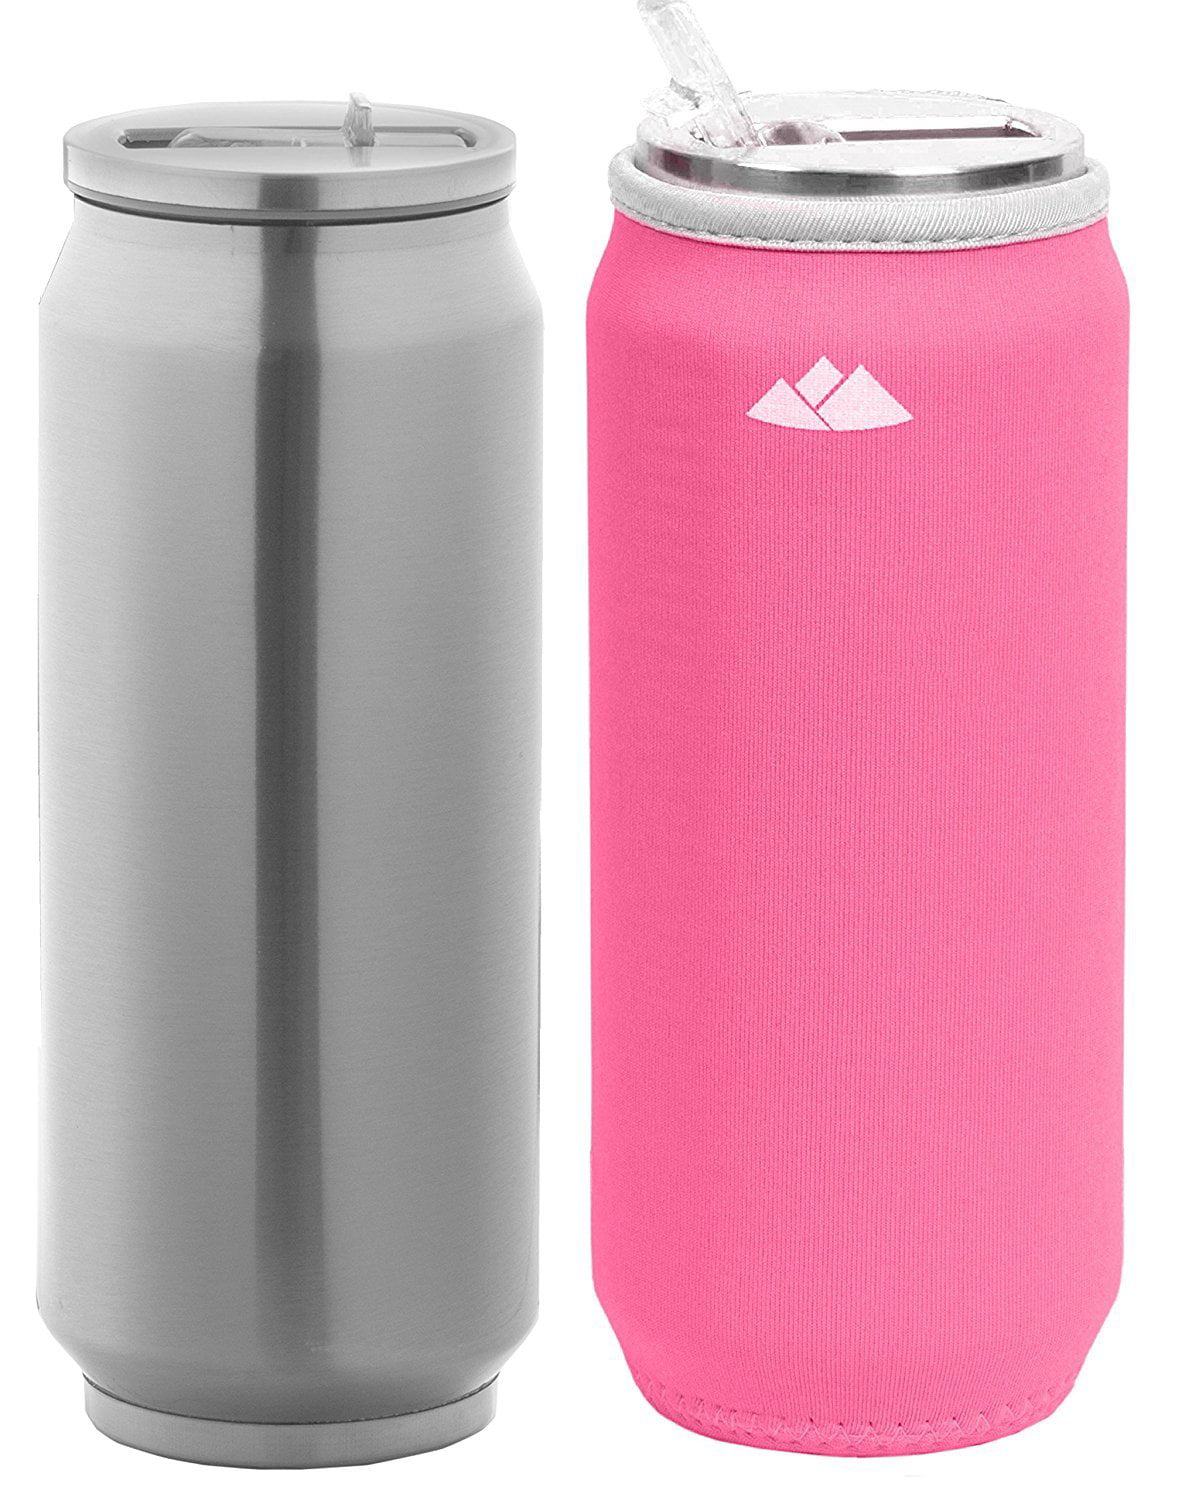 Melrose 12 oz (350 ml) Double Wall Stainless Steel Bottle Brushed Stainless Steel, Nickel